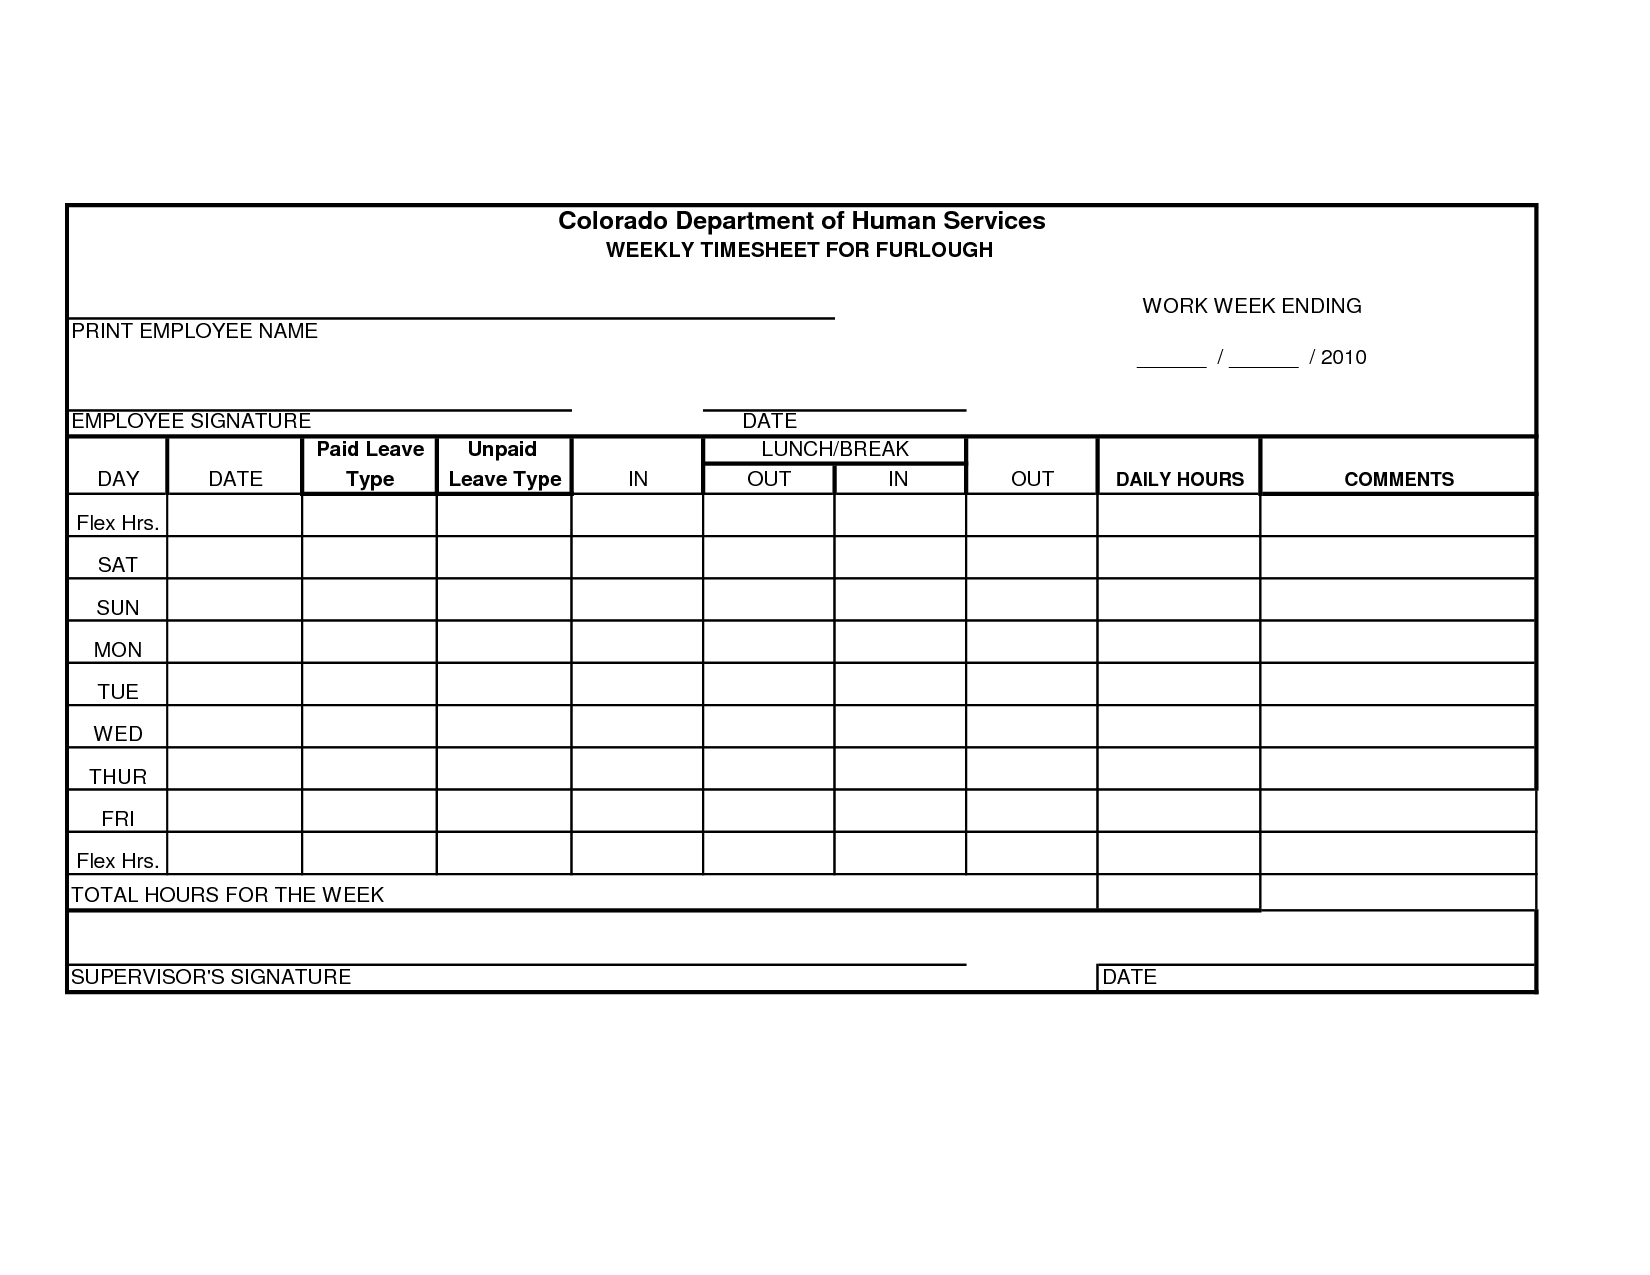 Free Printable Time Sheets Forms | Furlough Weekly Time Sheet - Free Printable Time Sheets Pdf